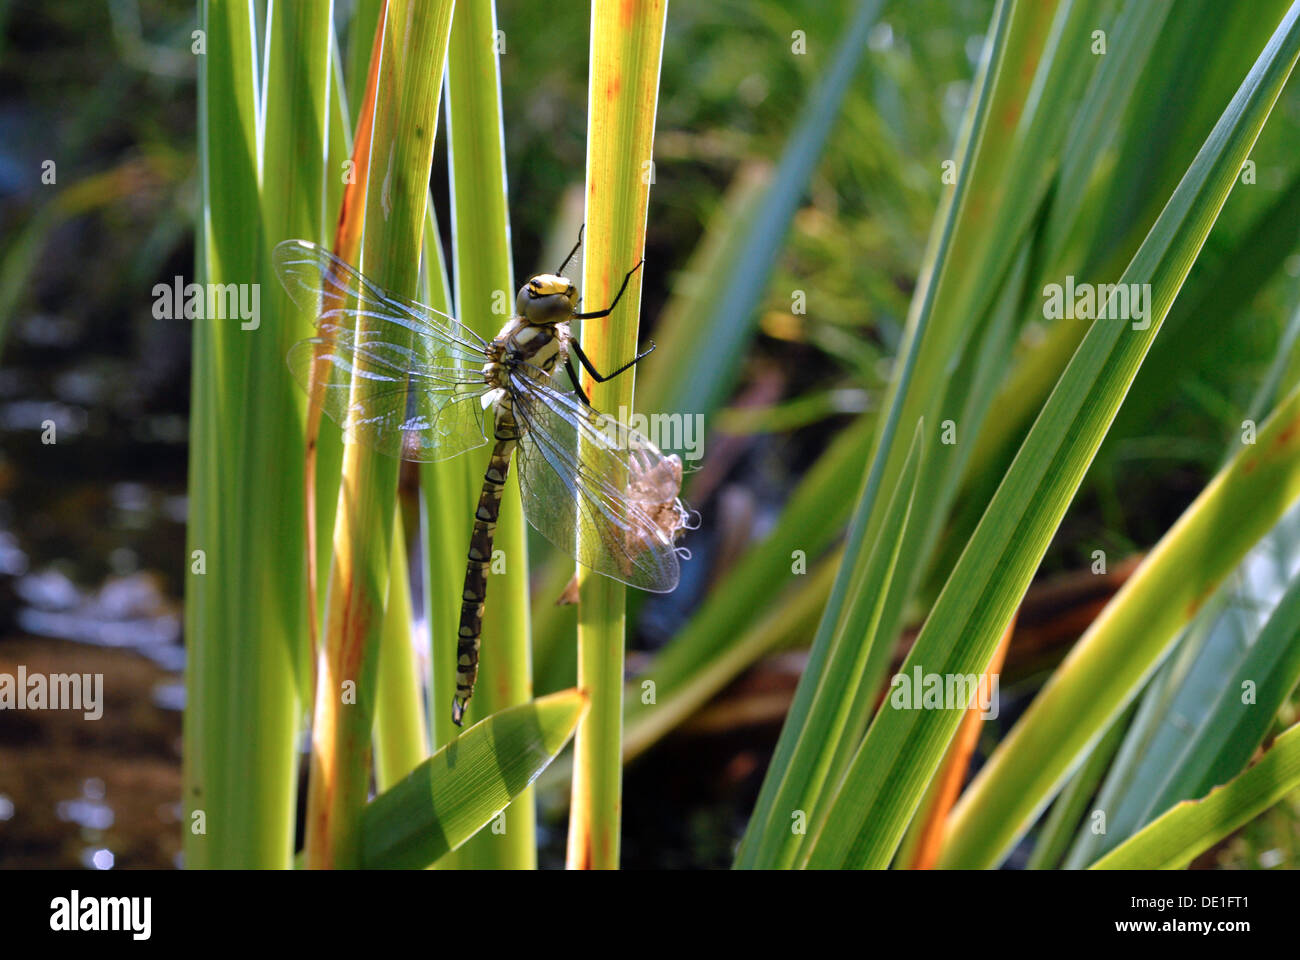 Dragonfly newly emerged from nymph stage. Stock Photo